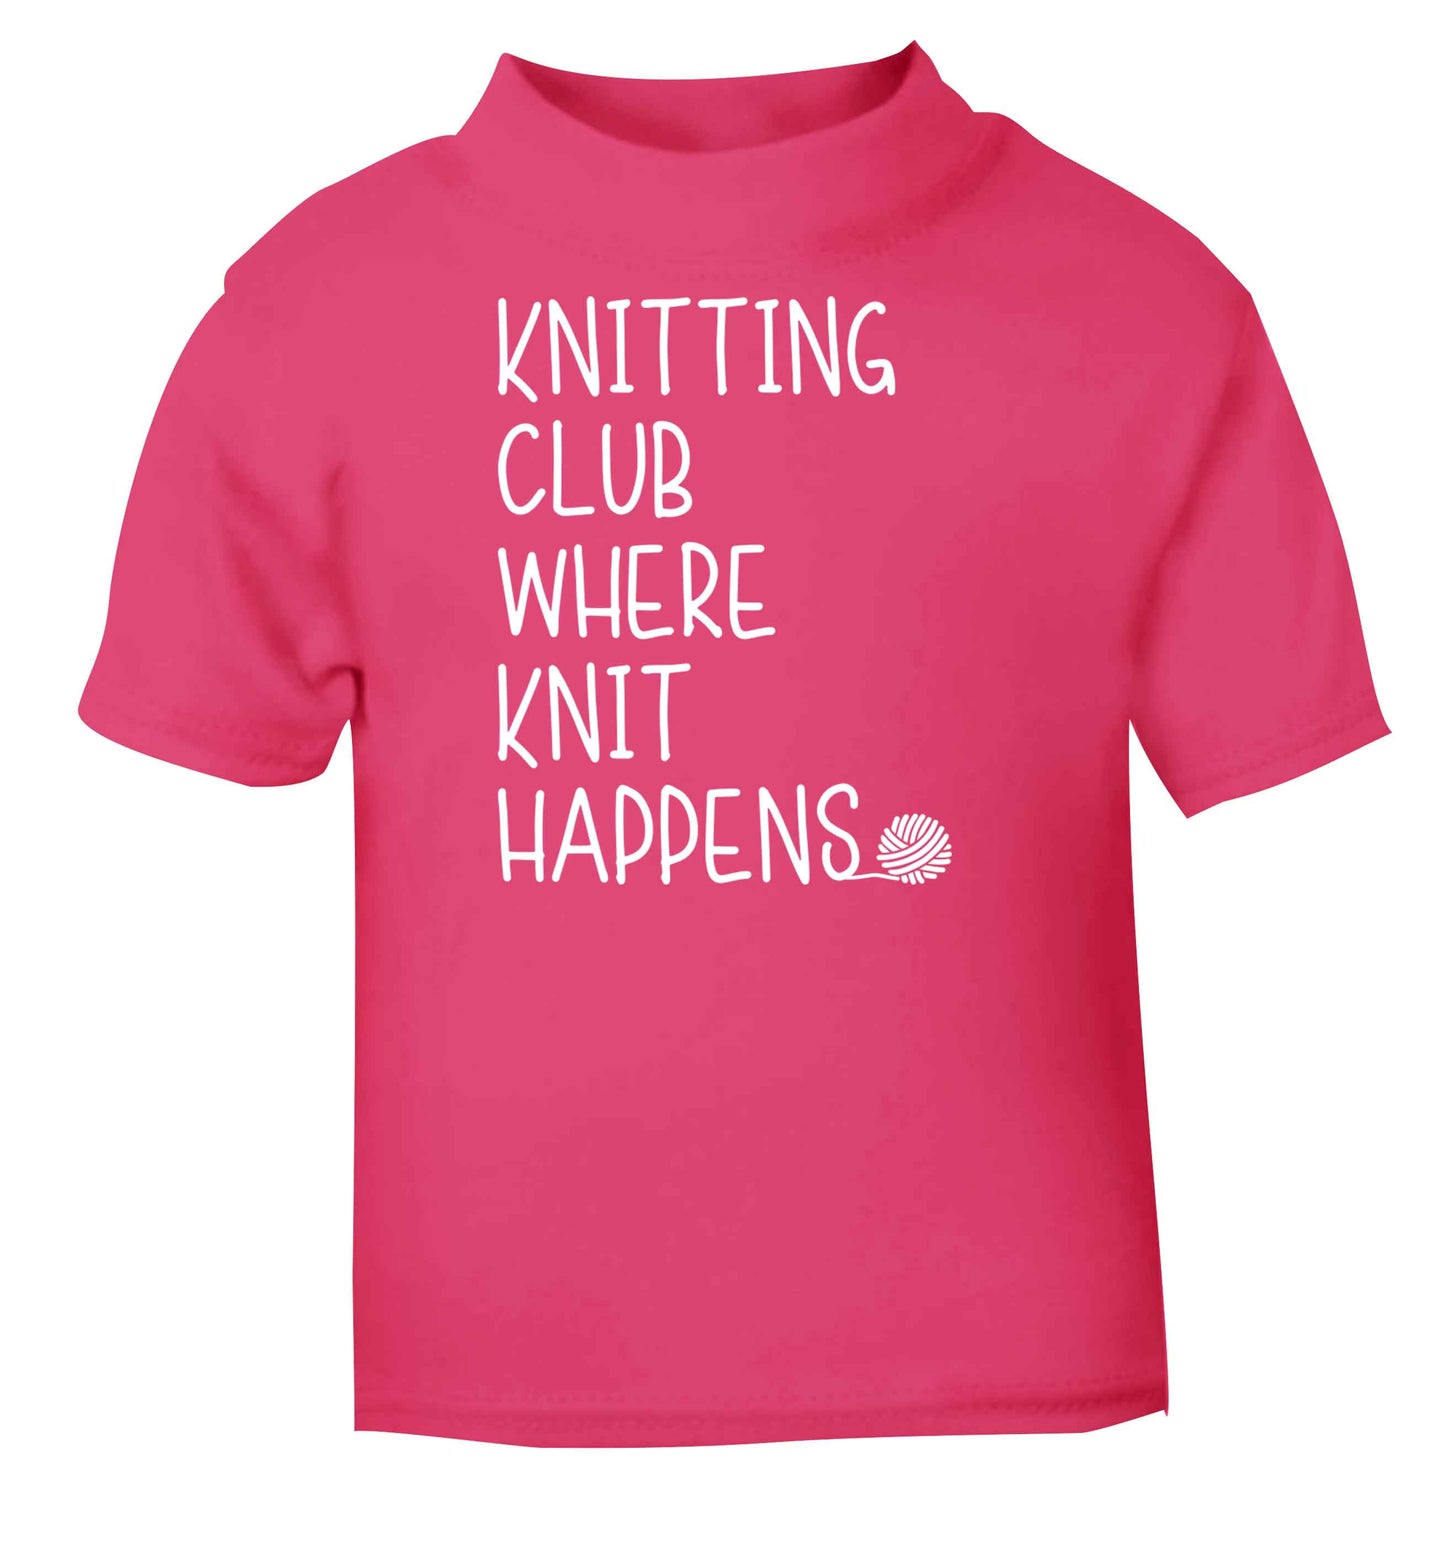 Knitting club where knit happens pink baby toddler Tshirt 2 Years